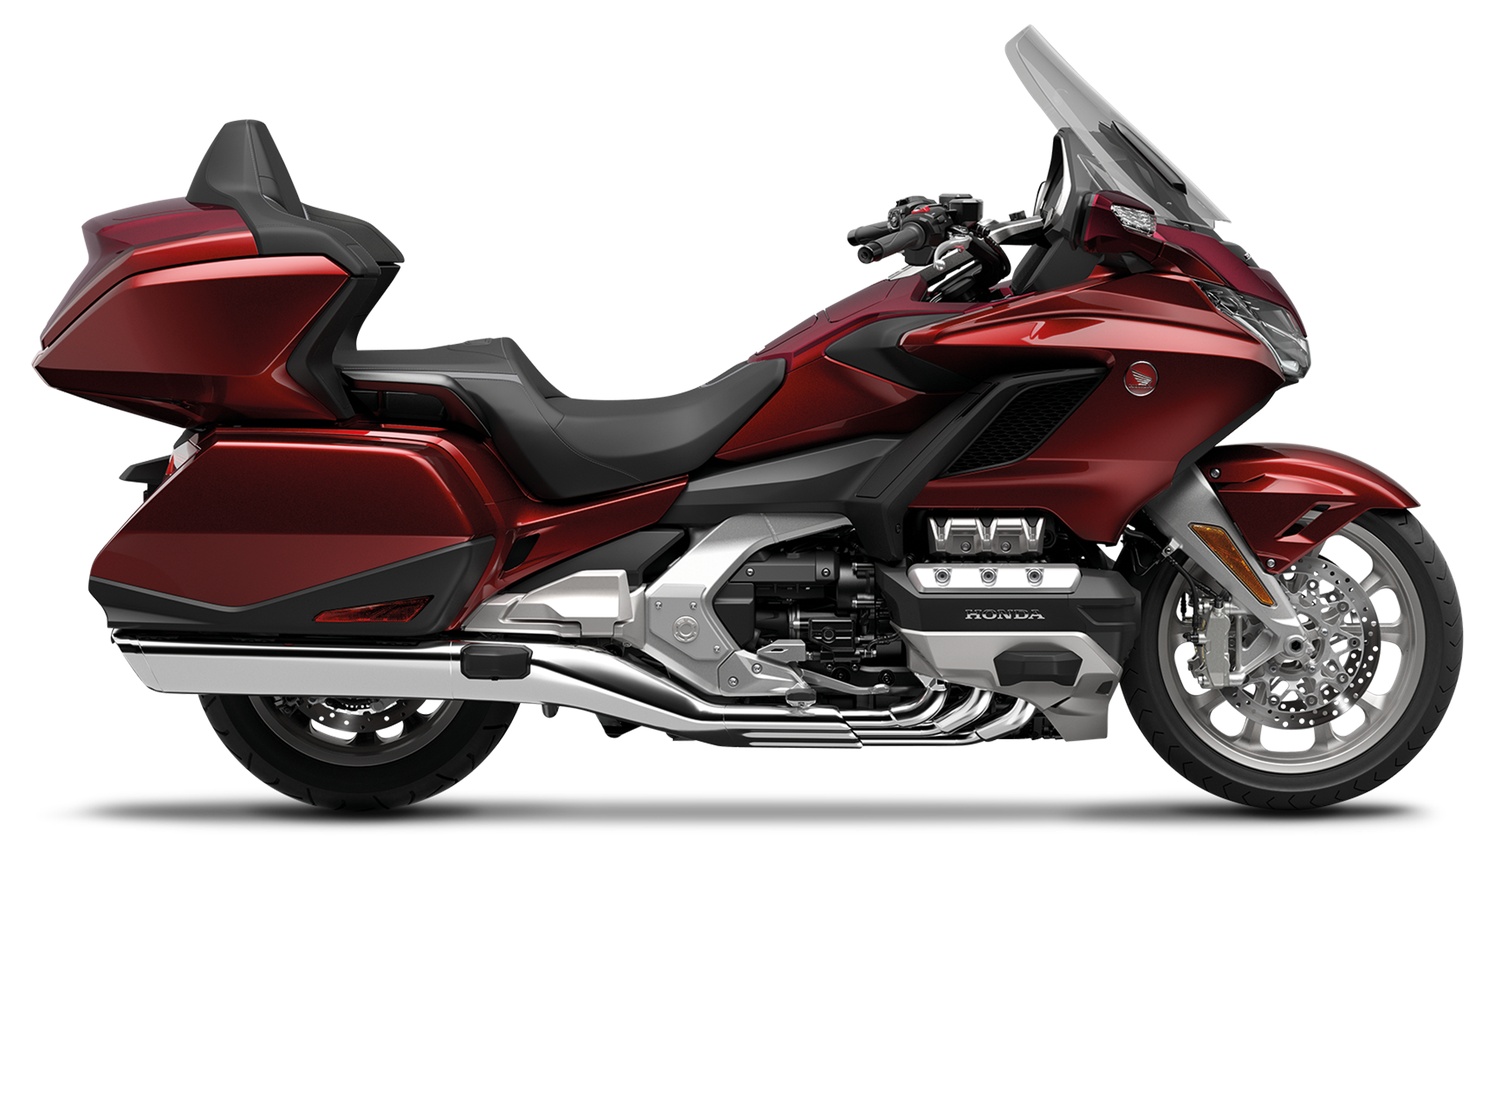 2023 Honda Gold Wing Tour GL1800P Candy Ardent Red/ Bordeaux Red Metallic (2-tone)